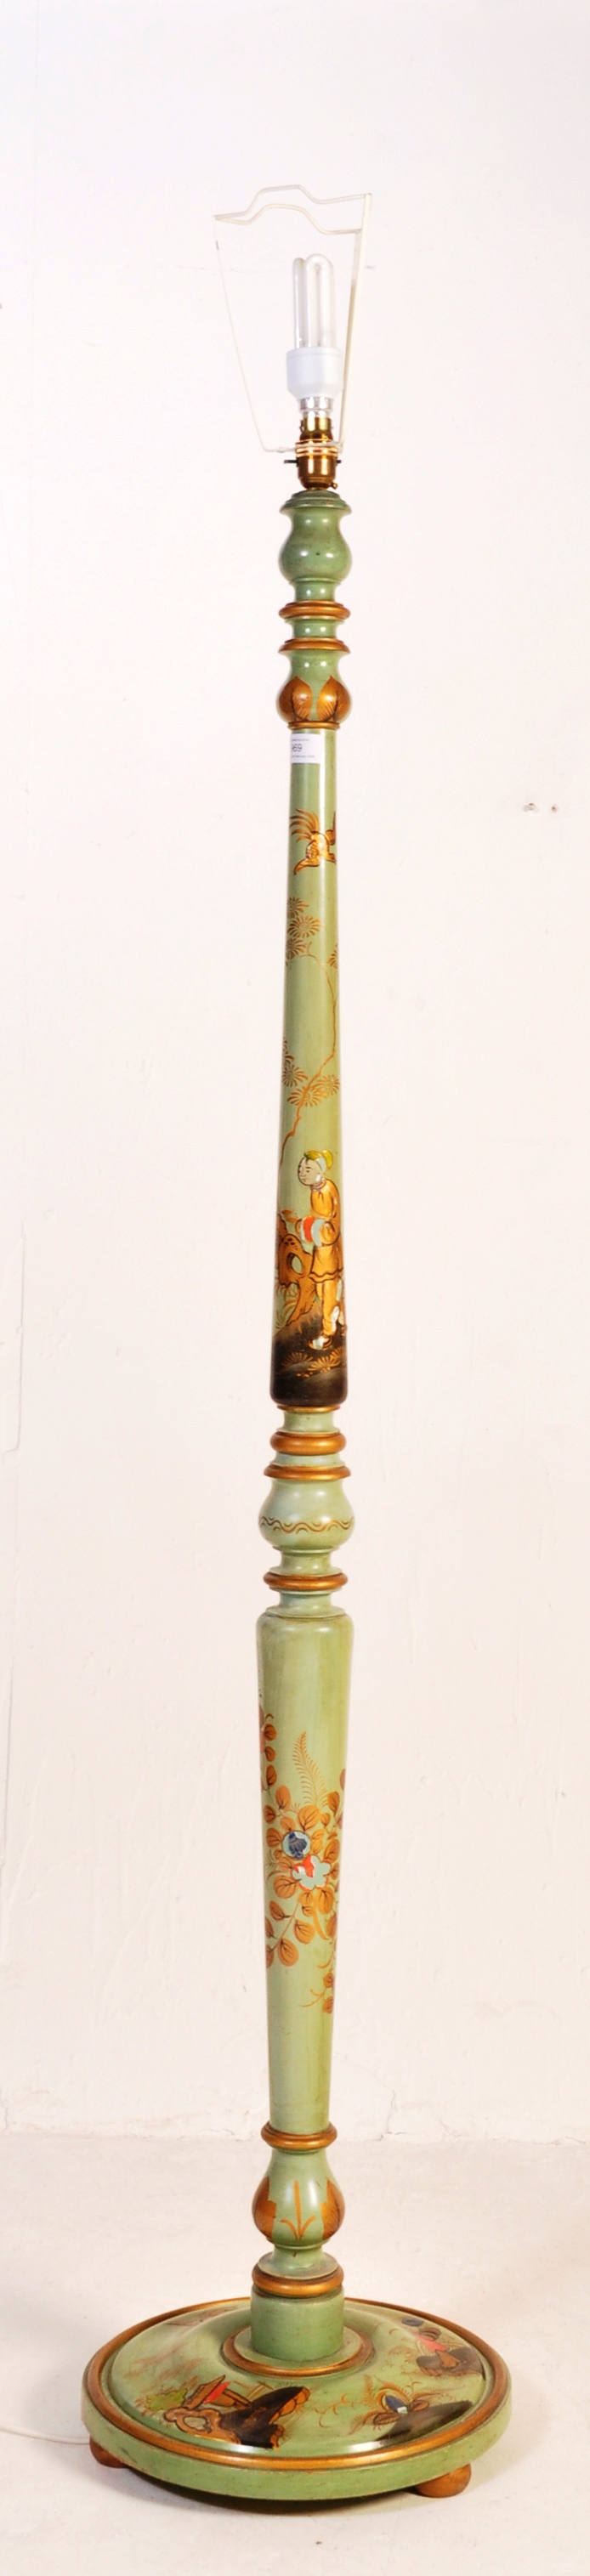 EARLY 20TH CENTURY LIBERTY LONDON TYPE STANDARD LAMP - Image 8 of 9